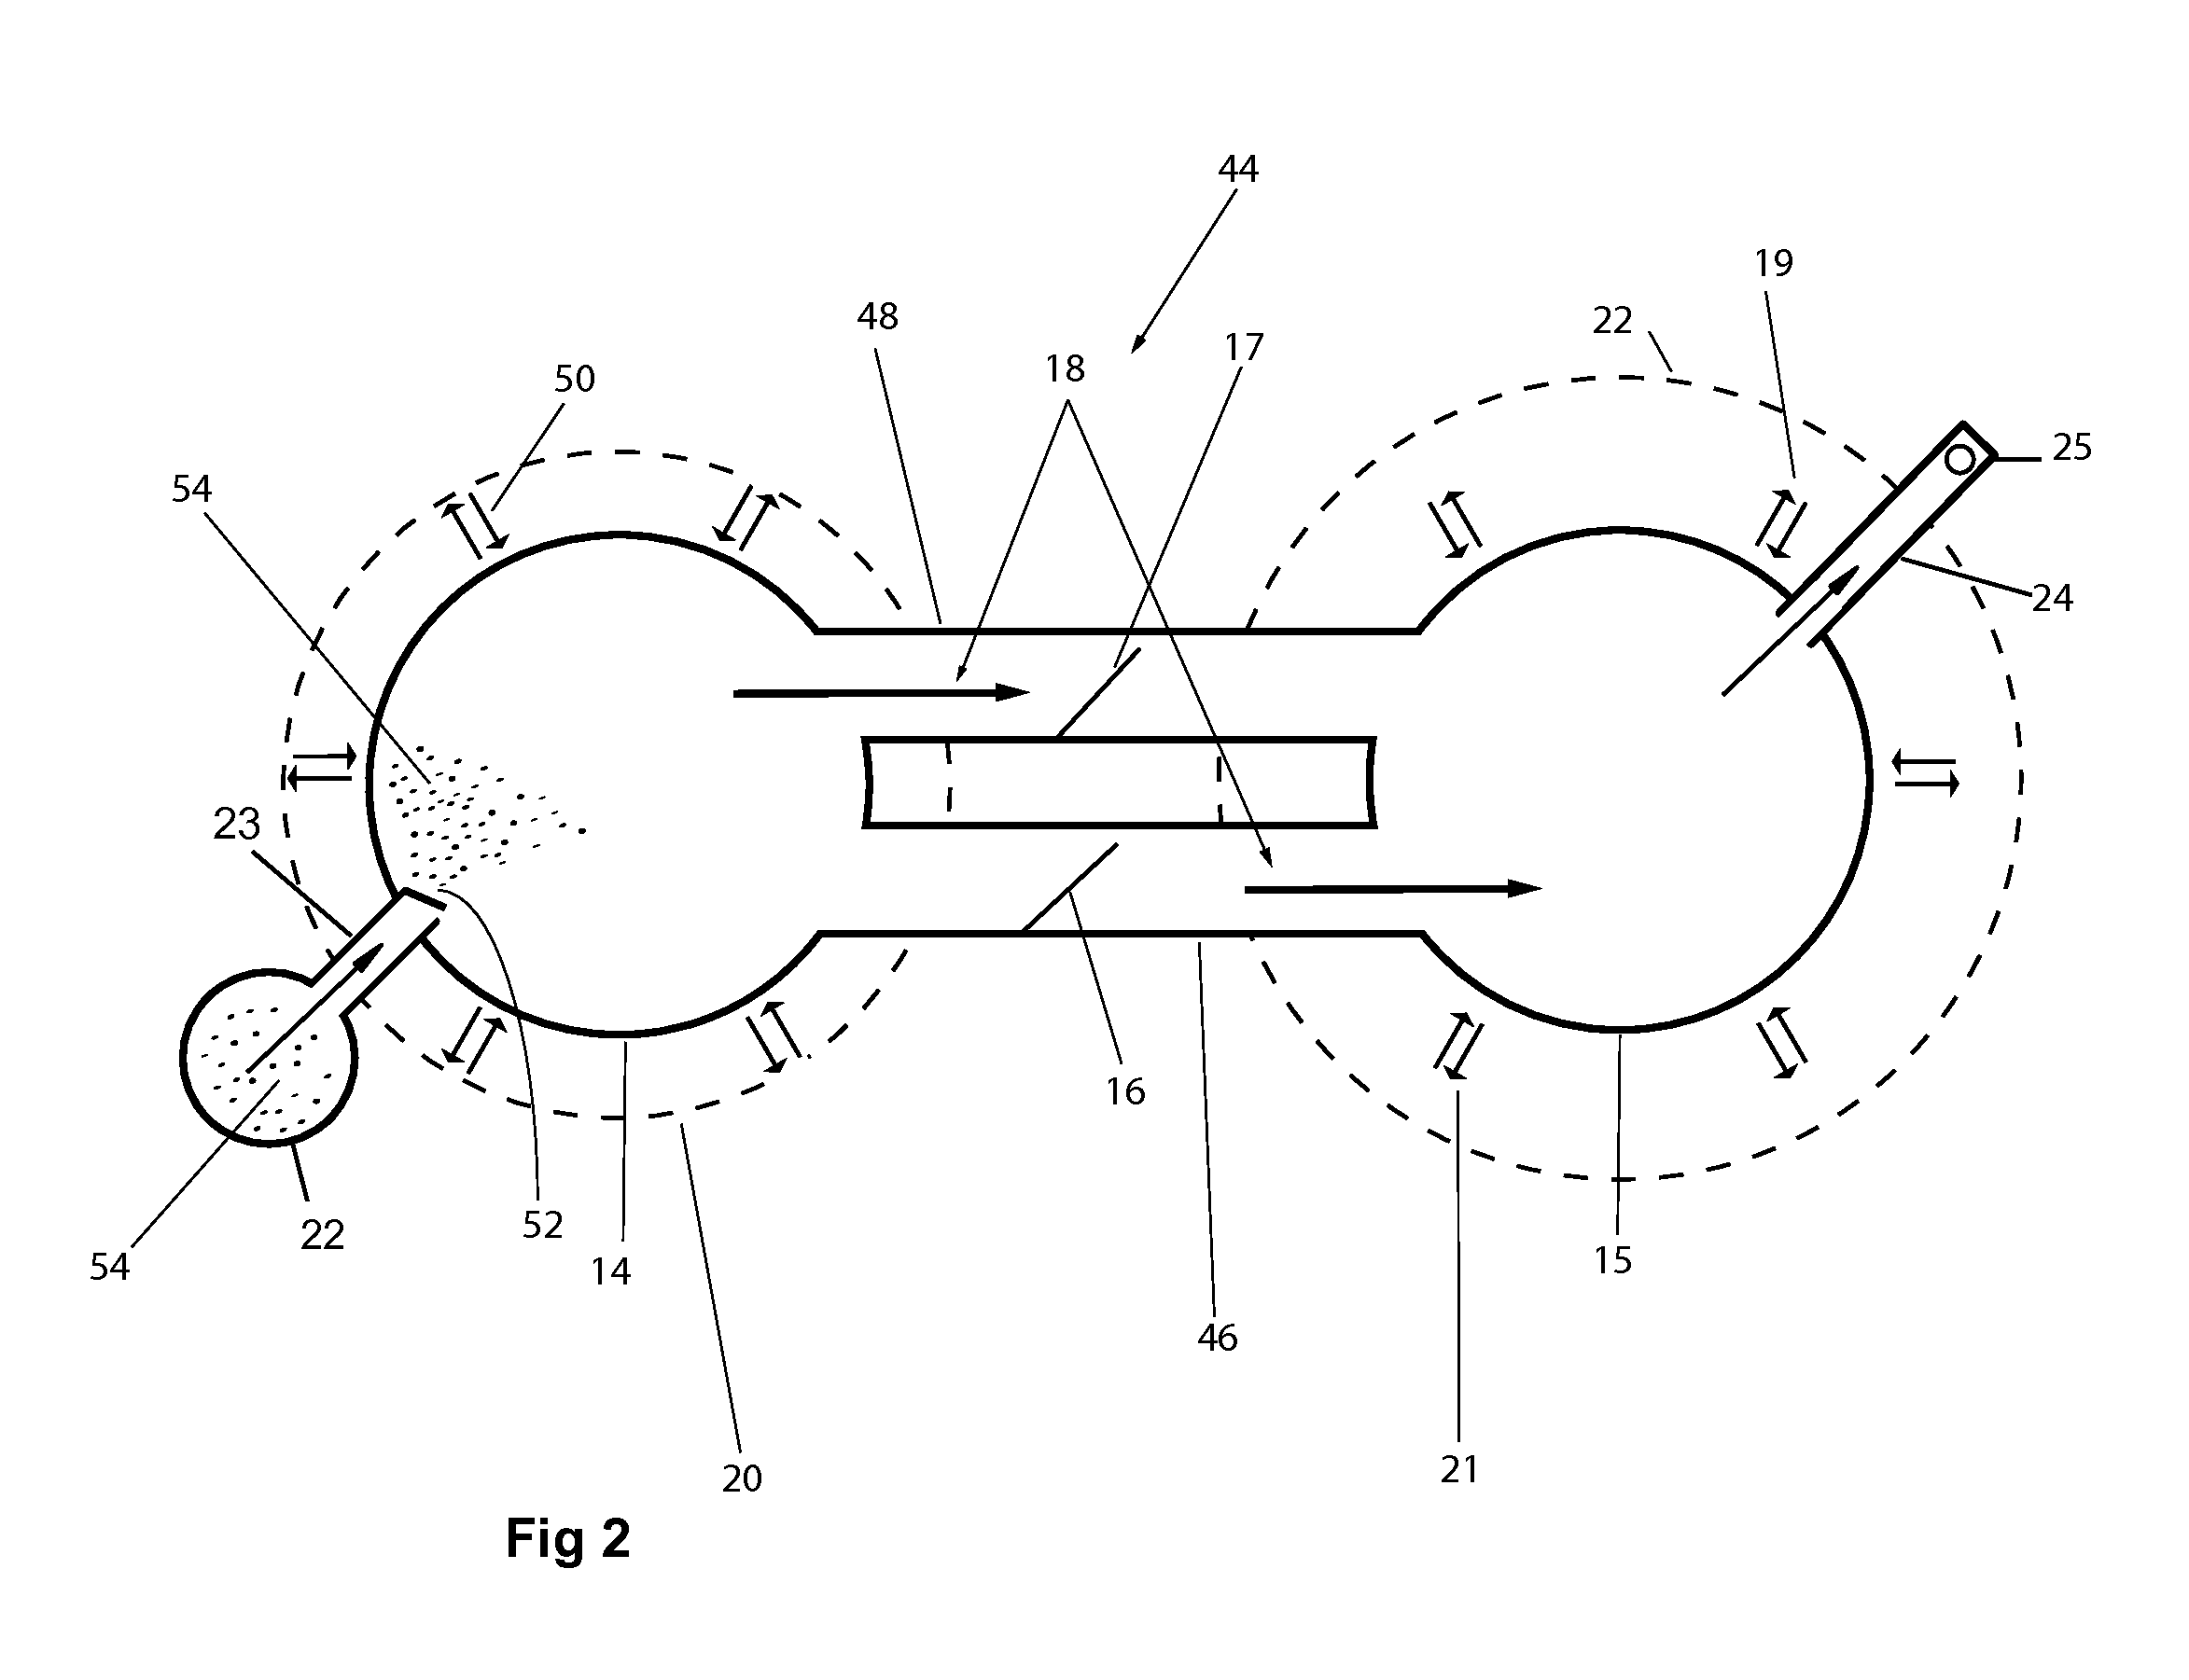 Cell flow device and method that provides a sequential linear flow of pressure resistance